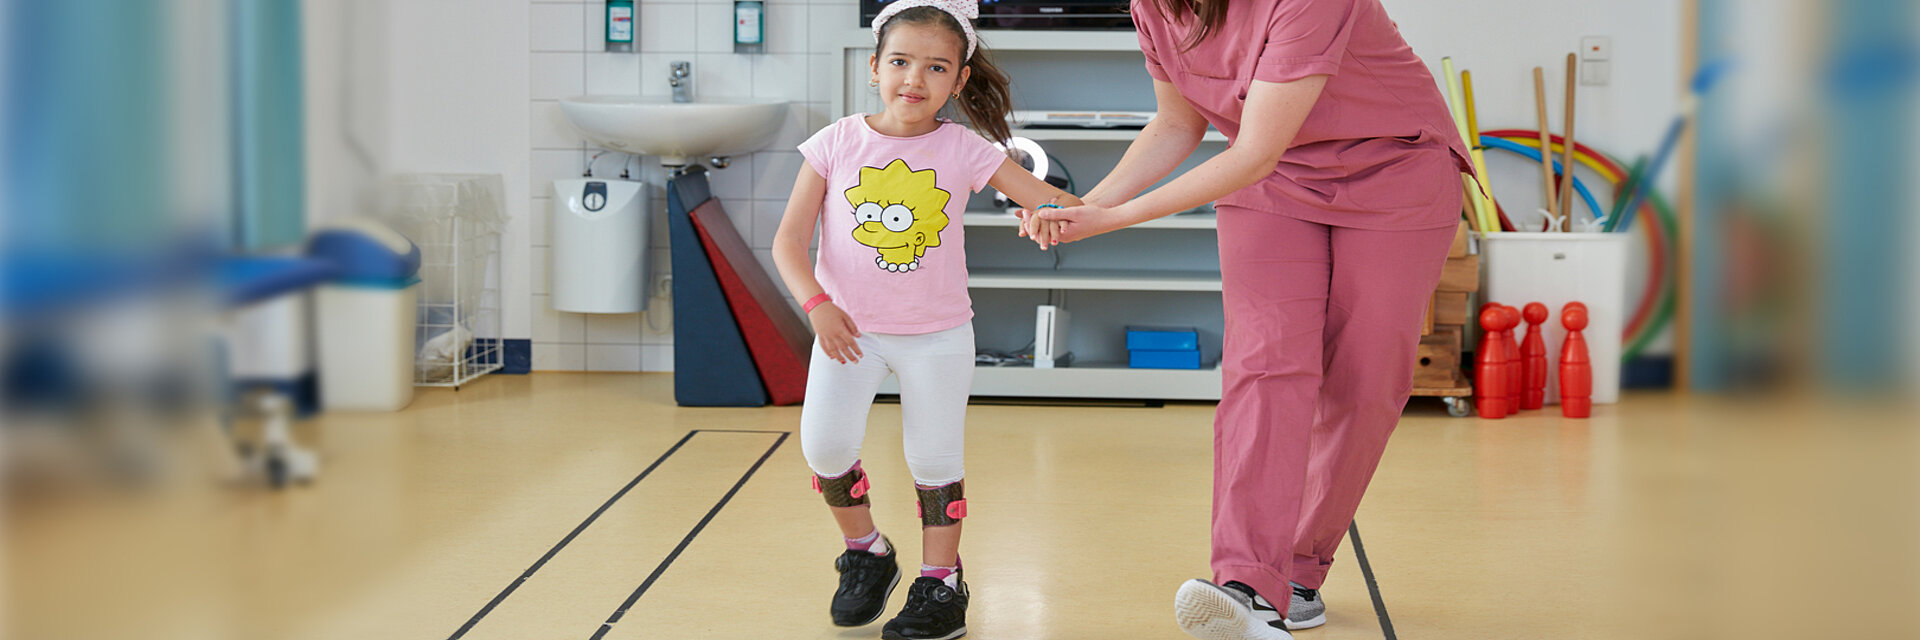 Picture: In order to determine the specifics of the gait pattern, a therapist films the movements of a patient.